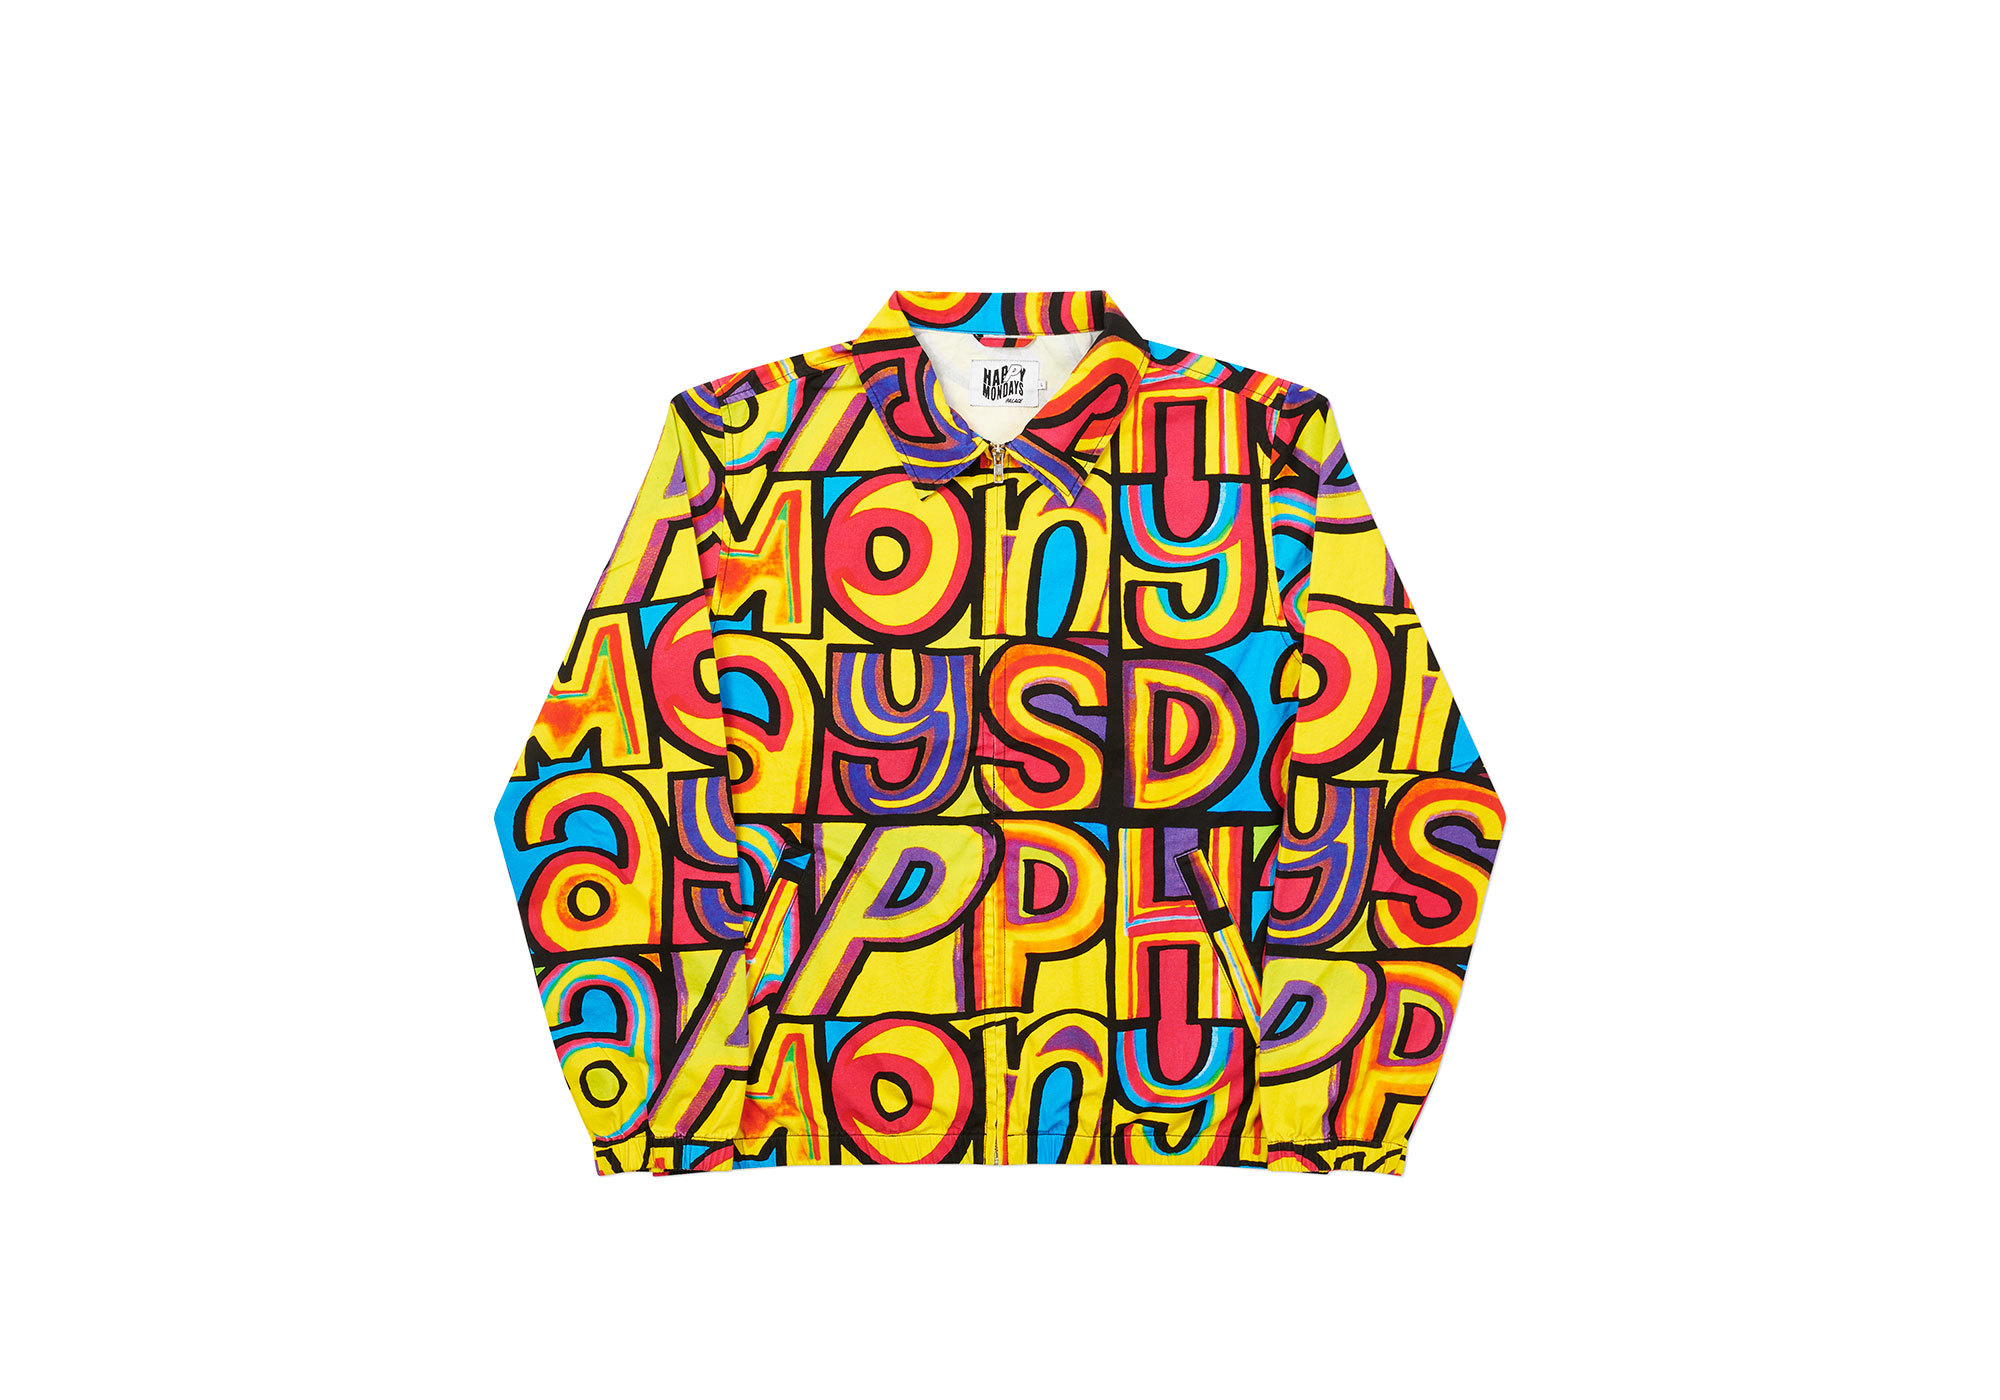 Hallelujah! Palace teams up with Happy Mondays - The Face